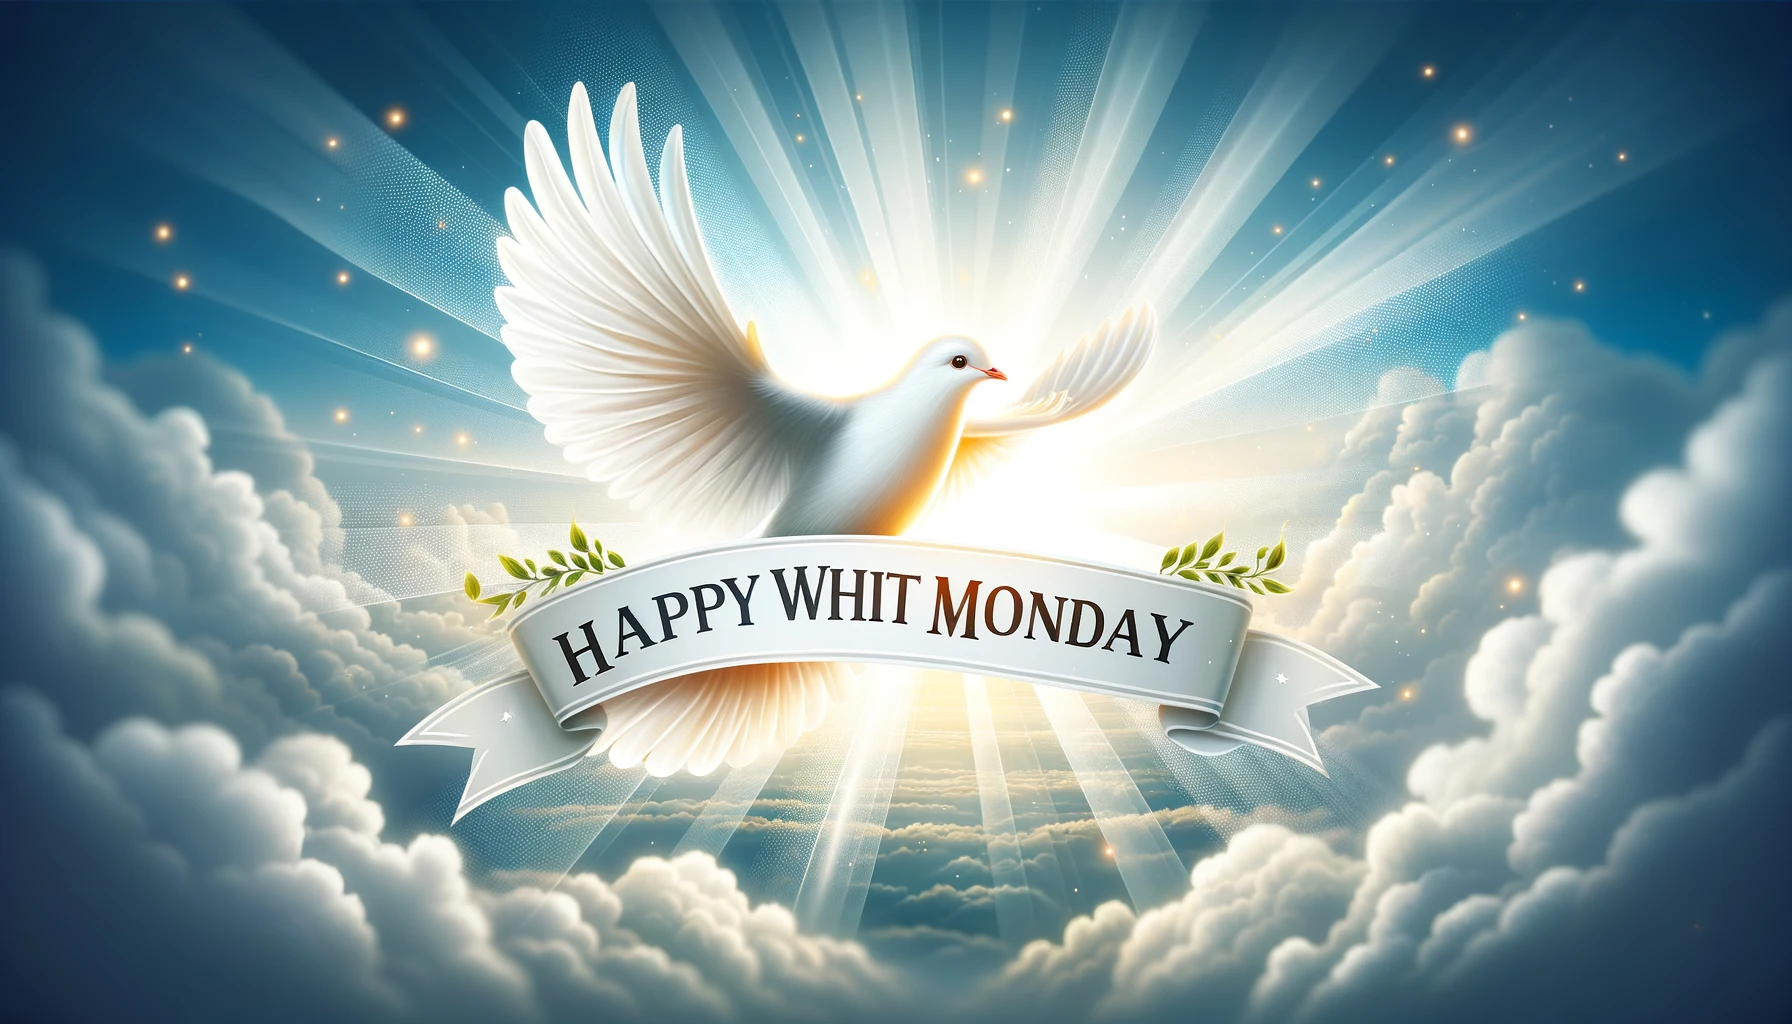 Best Whit Monday Greetings for Friends